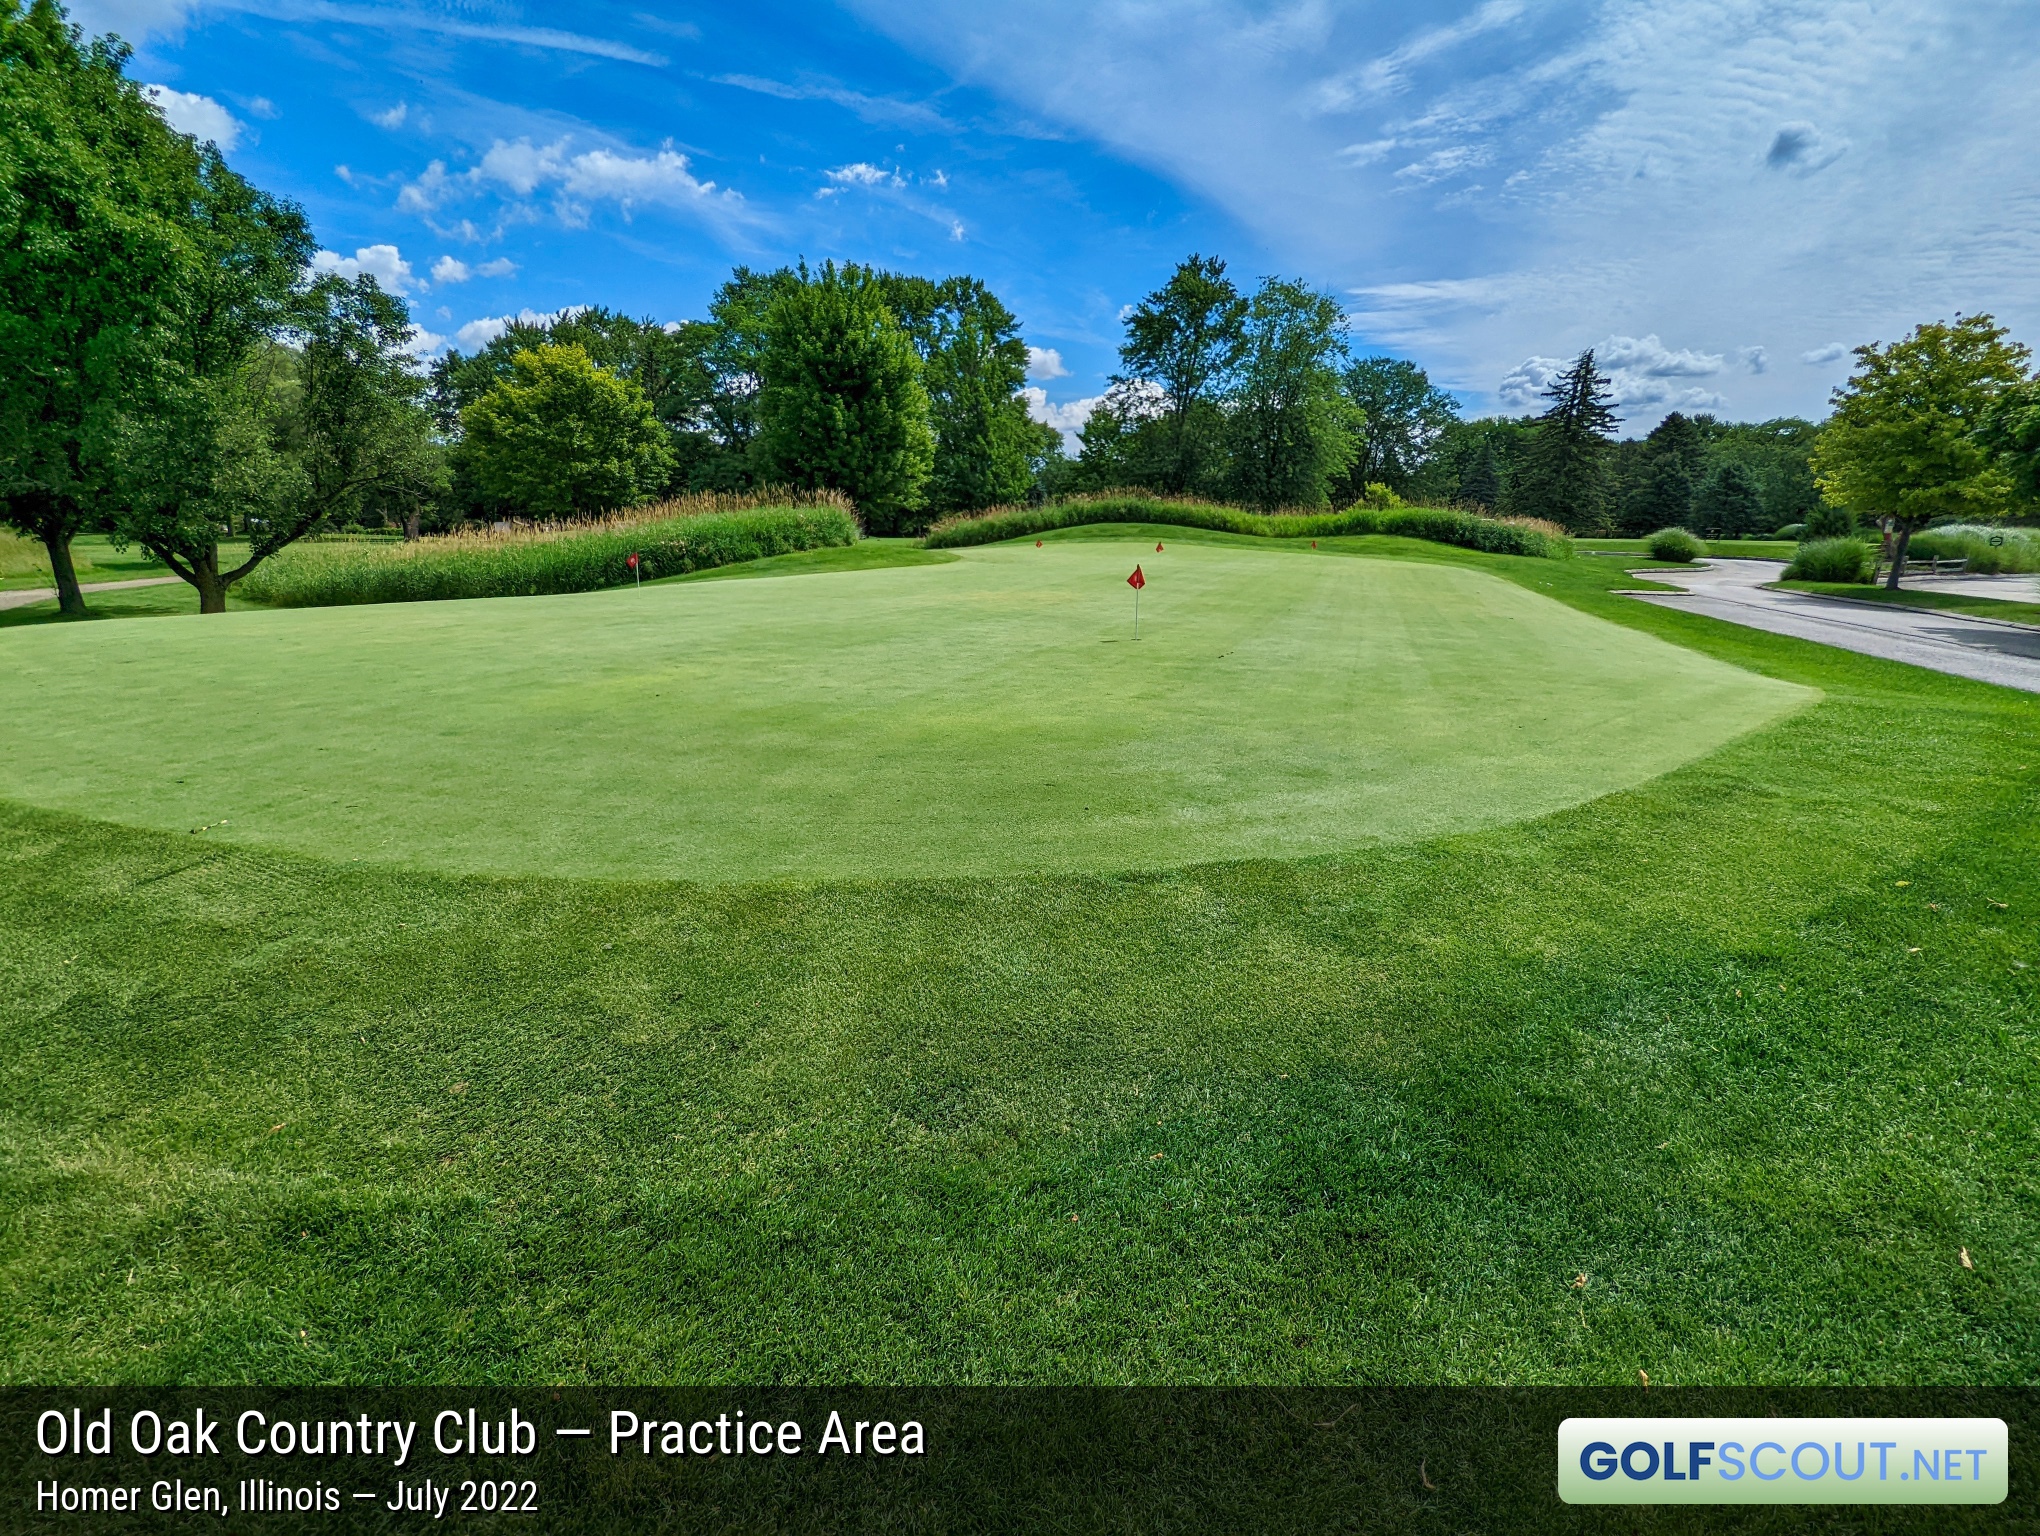 Photo of the practice area at Old Oak Country Club in Homer Glen, Illinois. 